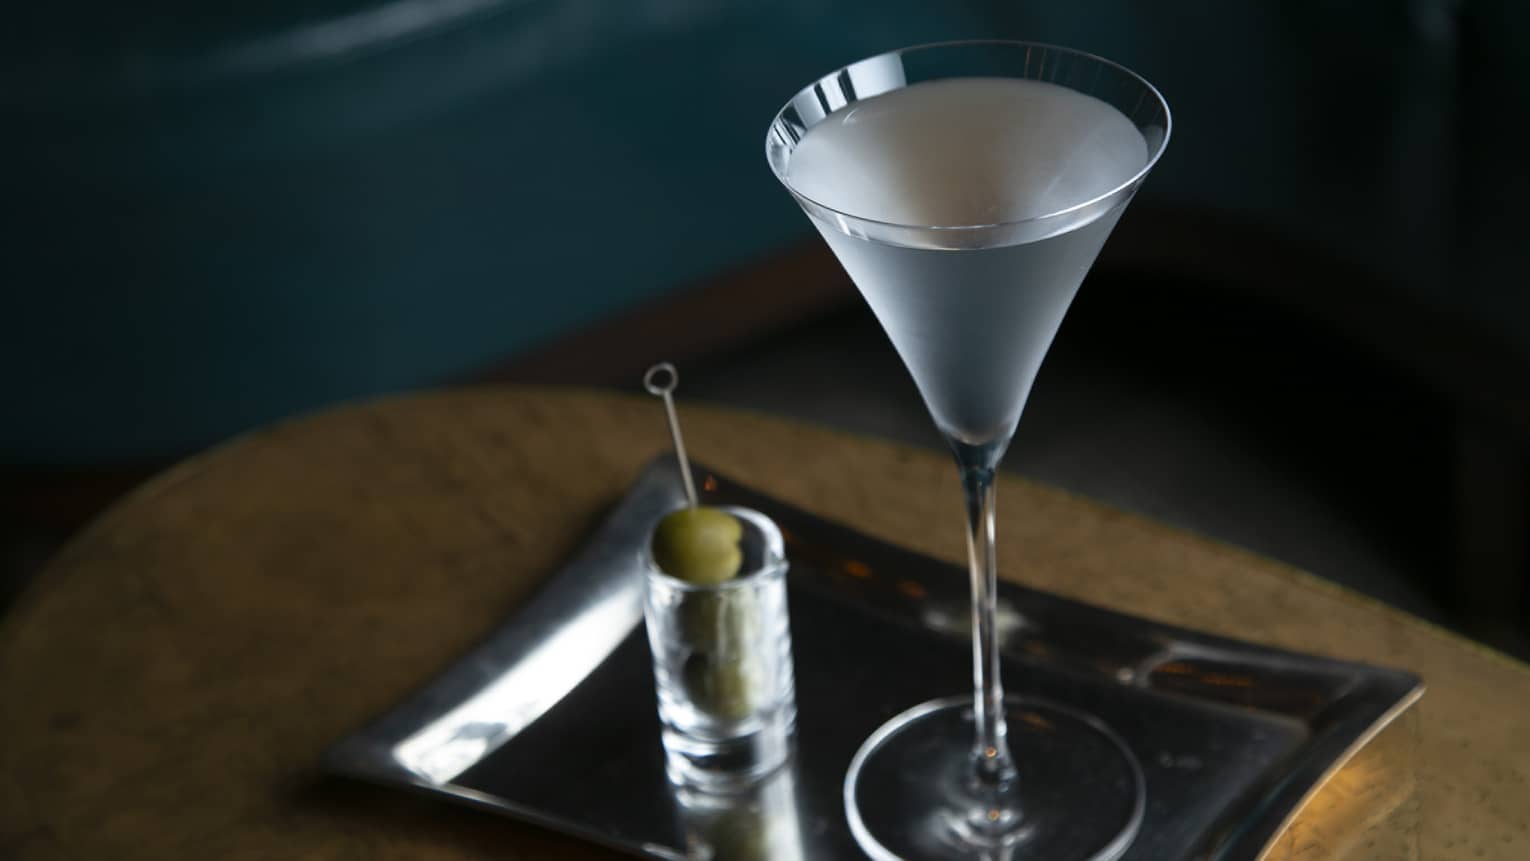 Signature cocktail in stemmed glass on silver tray, skewer of olives